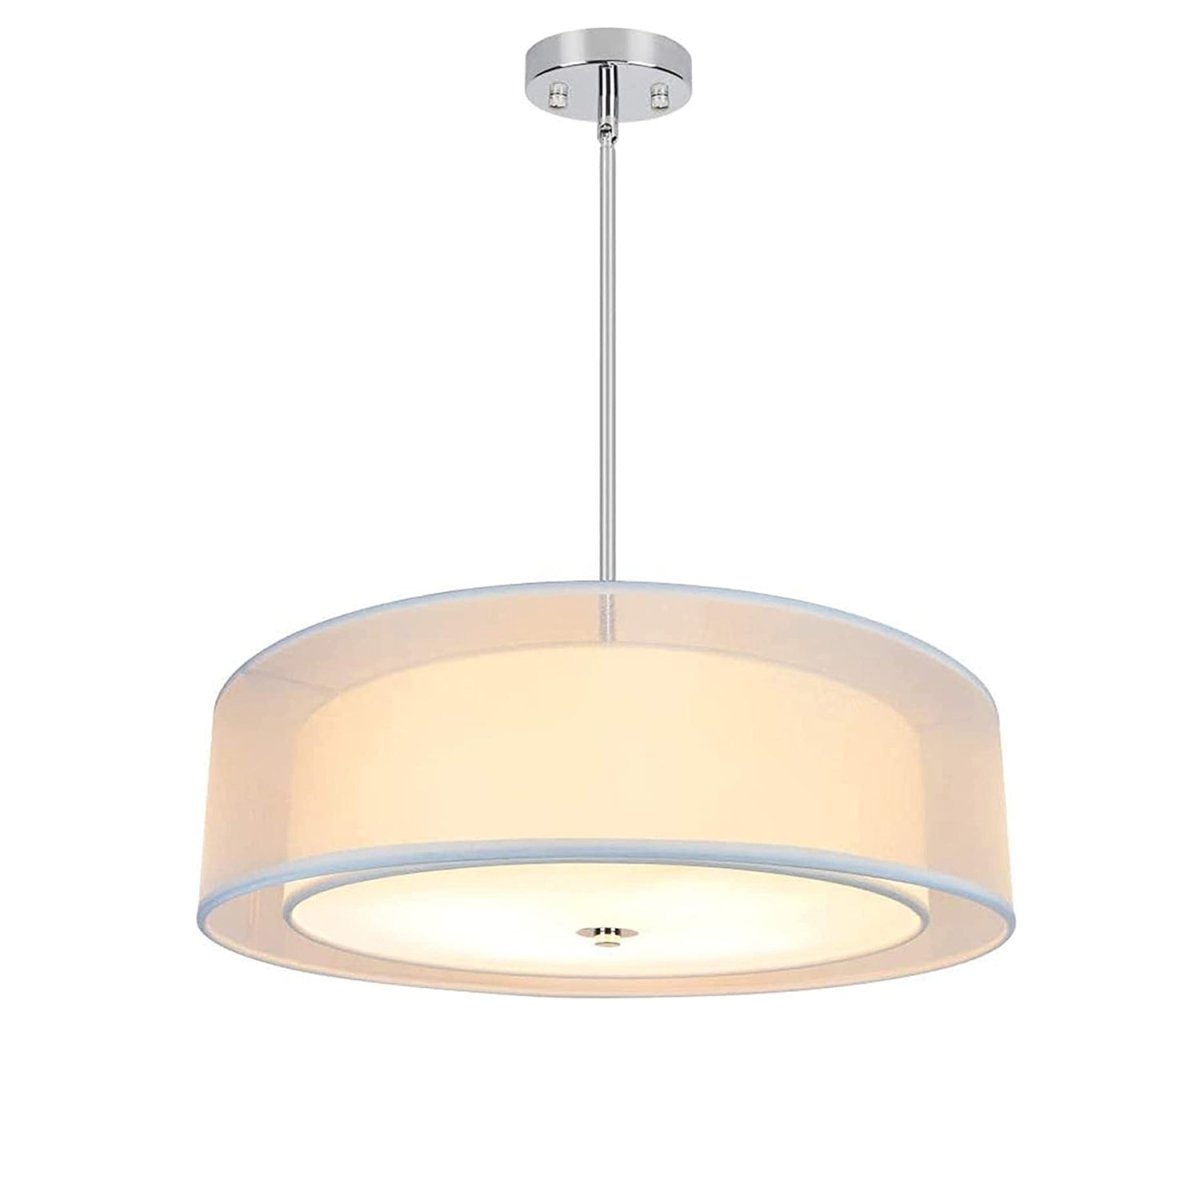 DLLT 3-Light Semi Flush Mount Ceiling Light Fixture, 20 Inch Adjustable Height Ceiling Hanging Lighting, Drum Pendant Light with Double Fabric Shade for Dining Room Living Room Bedroom Kitchen Entry Hallway - WSCL31-3W 1 | DEPULEY